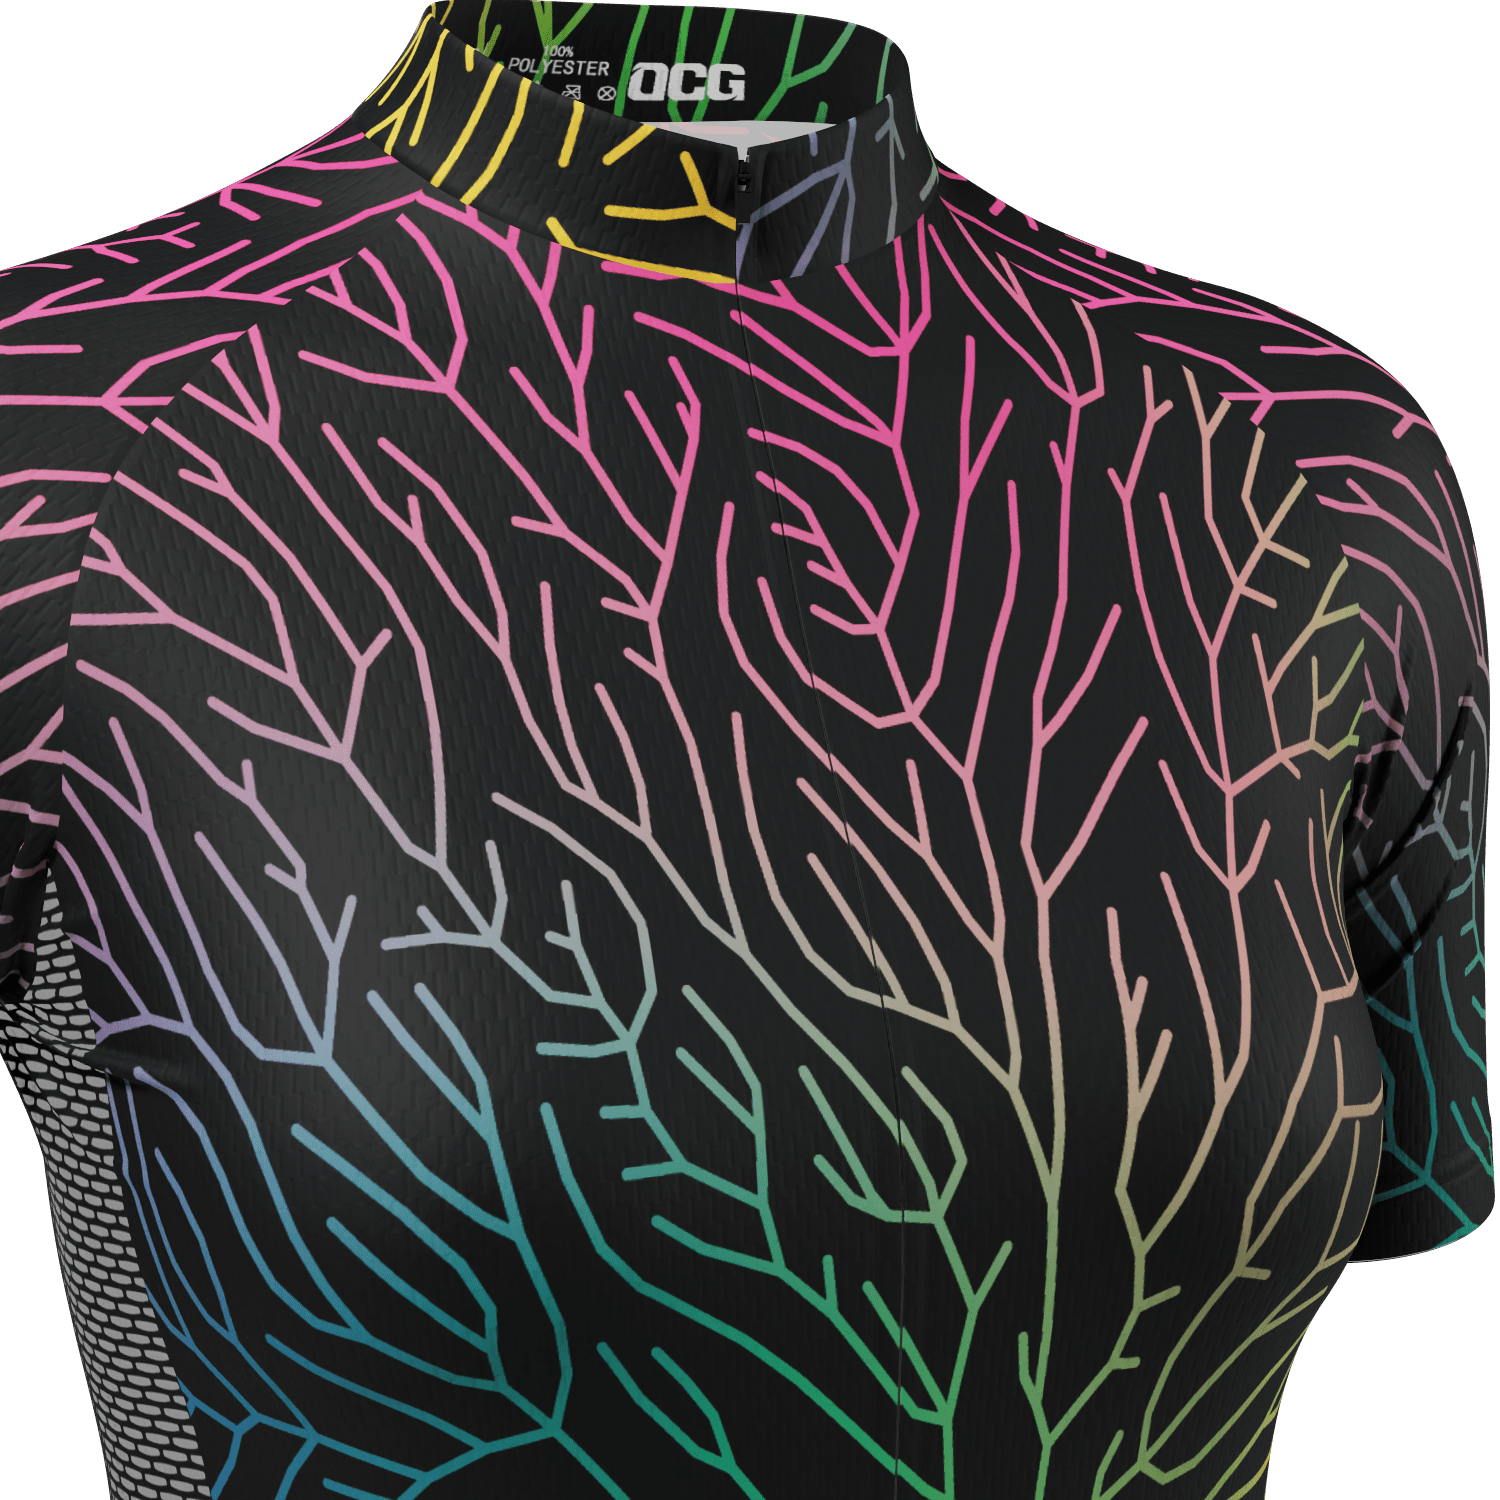 Women's Holographic Branches Short Sleeve Cycling Jersey